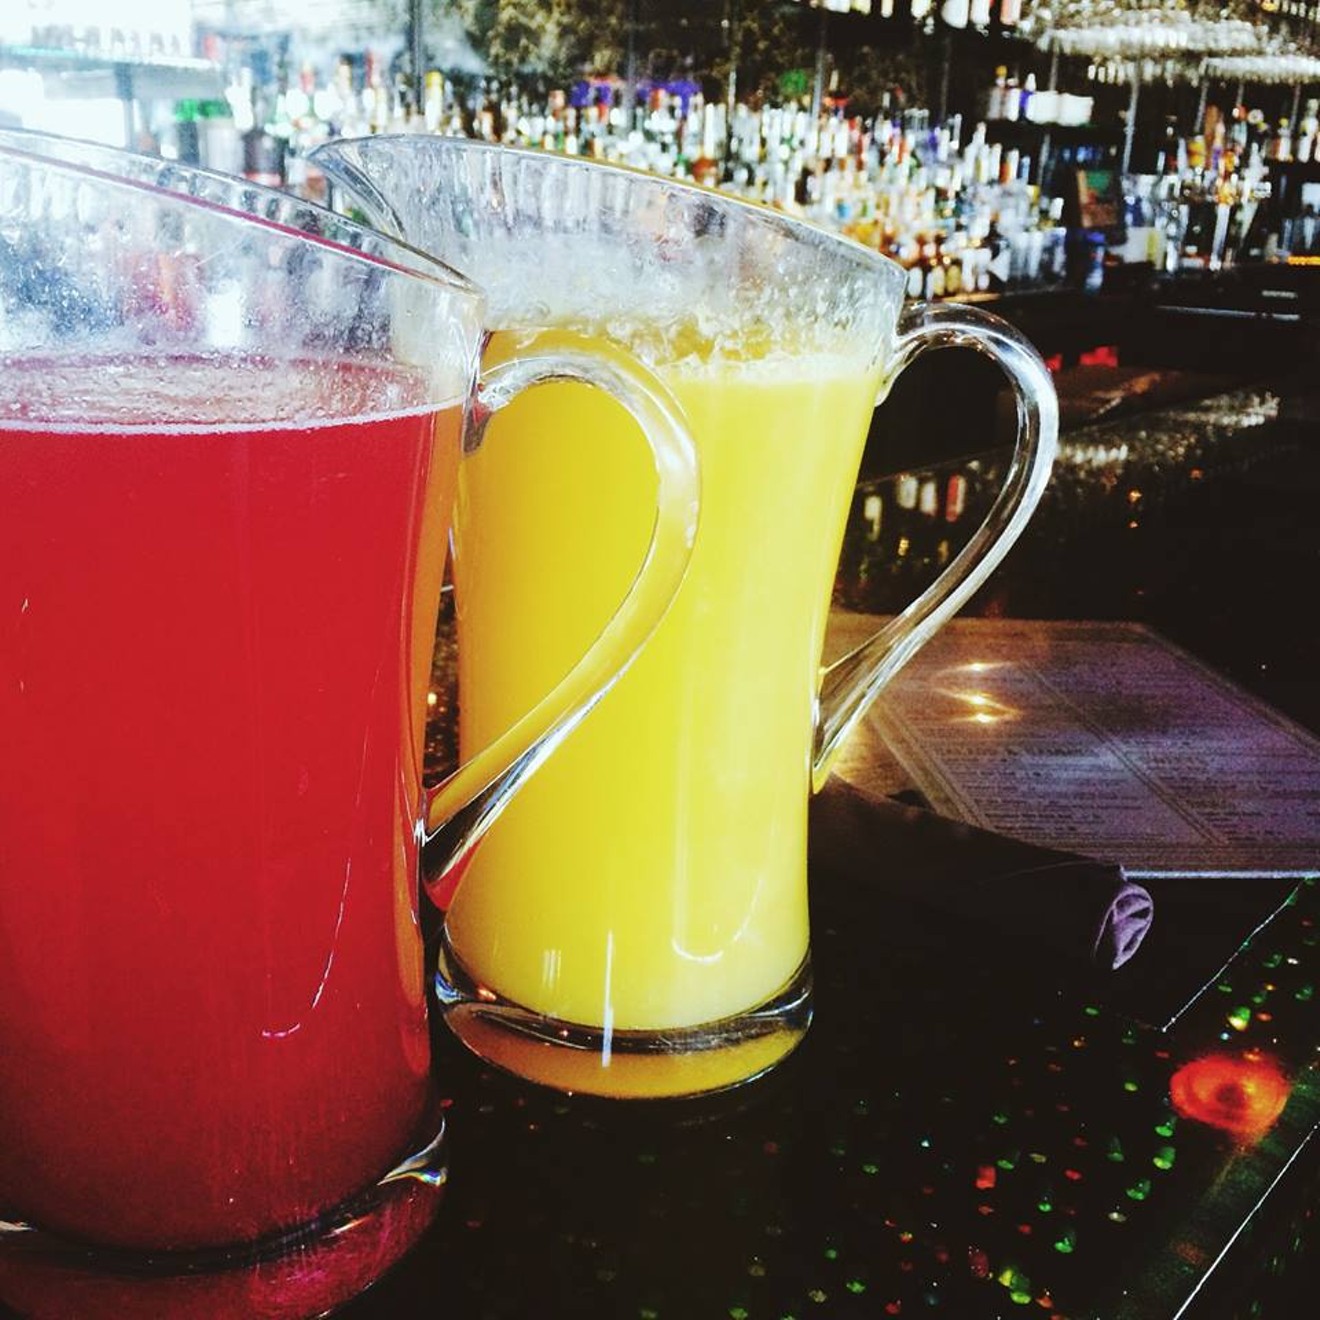 The weekend is calling, and so are the pitchers.